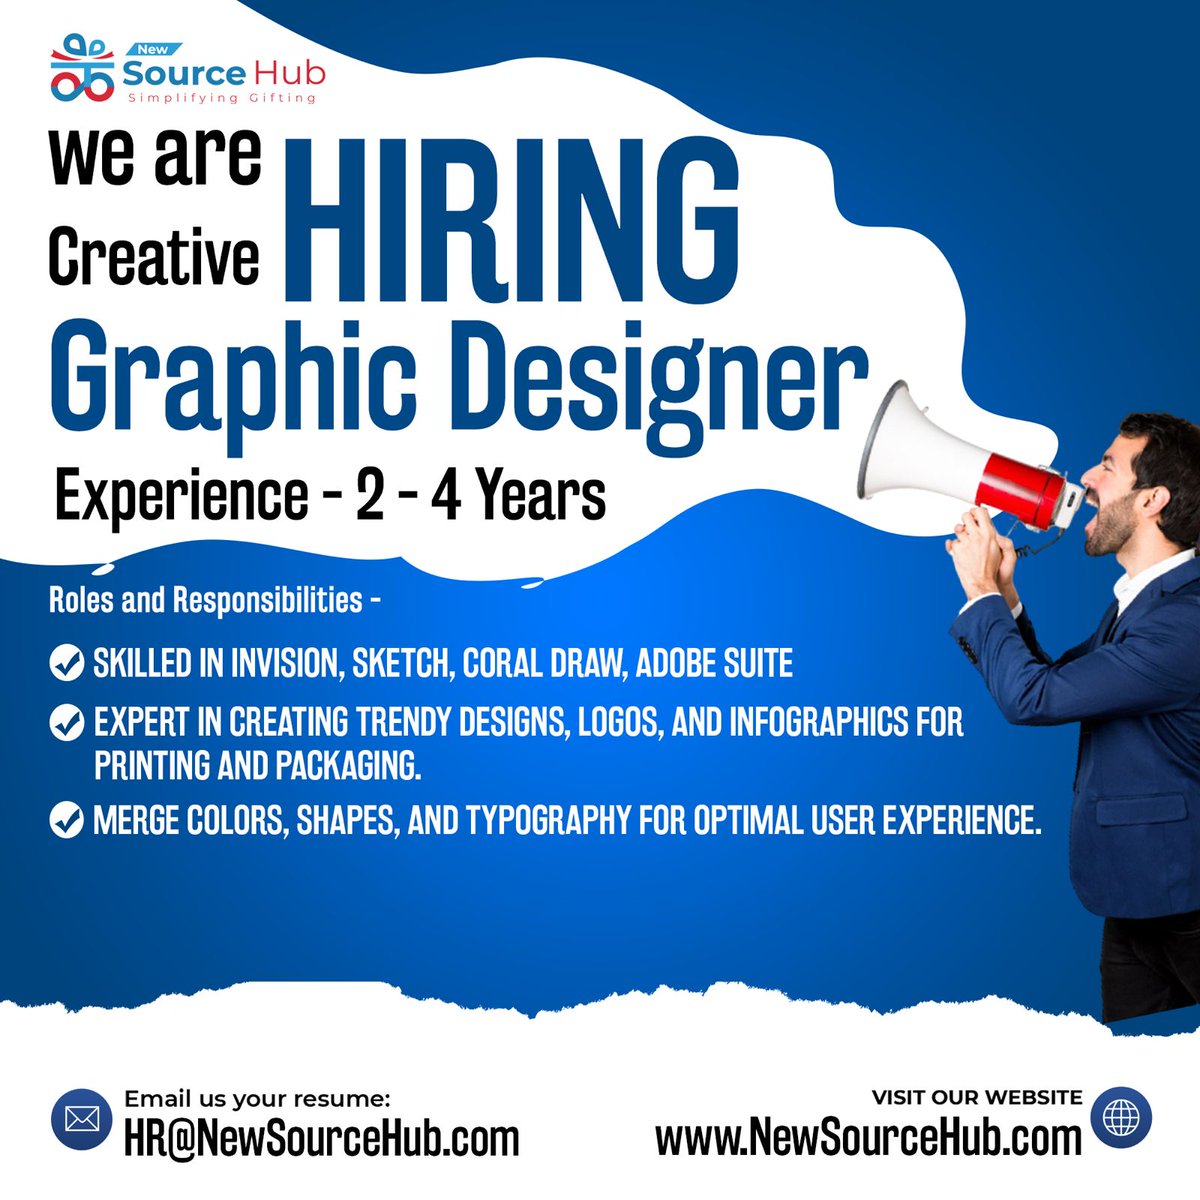 Hiring for Graphic Designer! #jobs #hiring #newsourcehub #corporategifting #customgifts #corporategifting #personalizedgifts #CorporateGifting #EmployeeGifting #GiftIdeas #EmployeeRecognition #GiftHampers #Branded